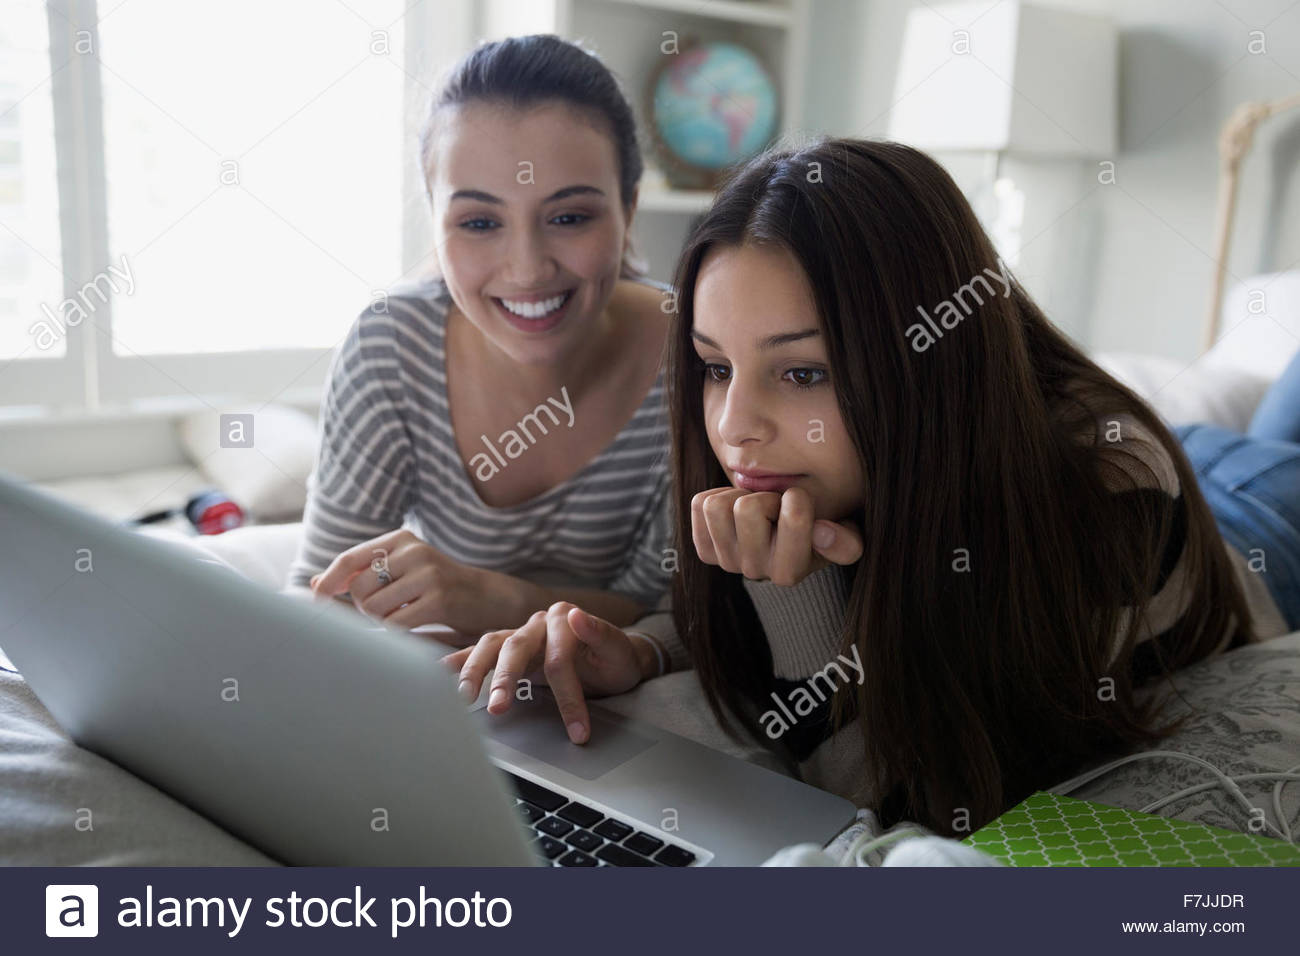 Sisters using laptop on bed Stock Photo